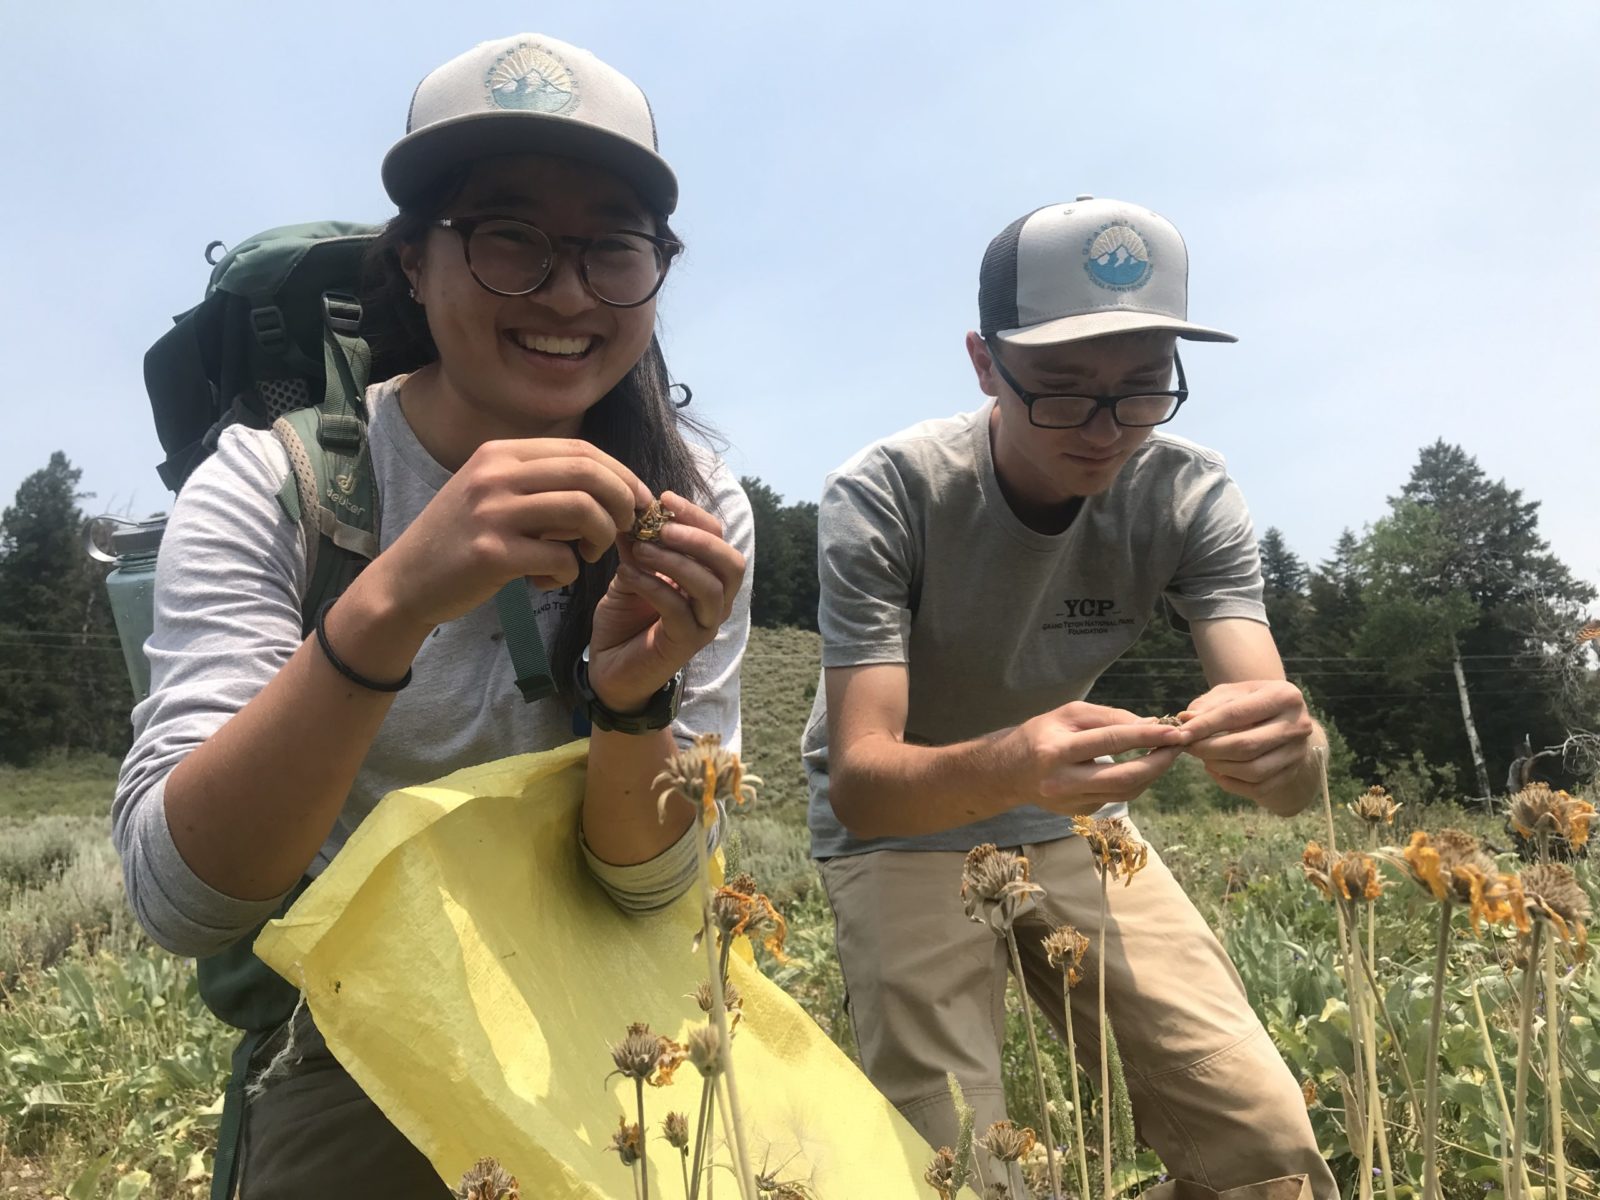 YCP members Natalie and Robert assist the Vegetation Crew collecting Balsamroot seeds to help maintain this native species in Grand Teton.